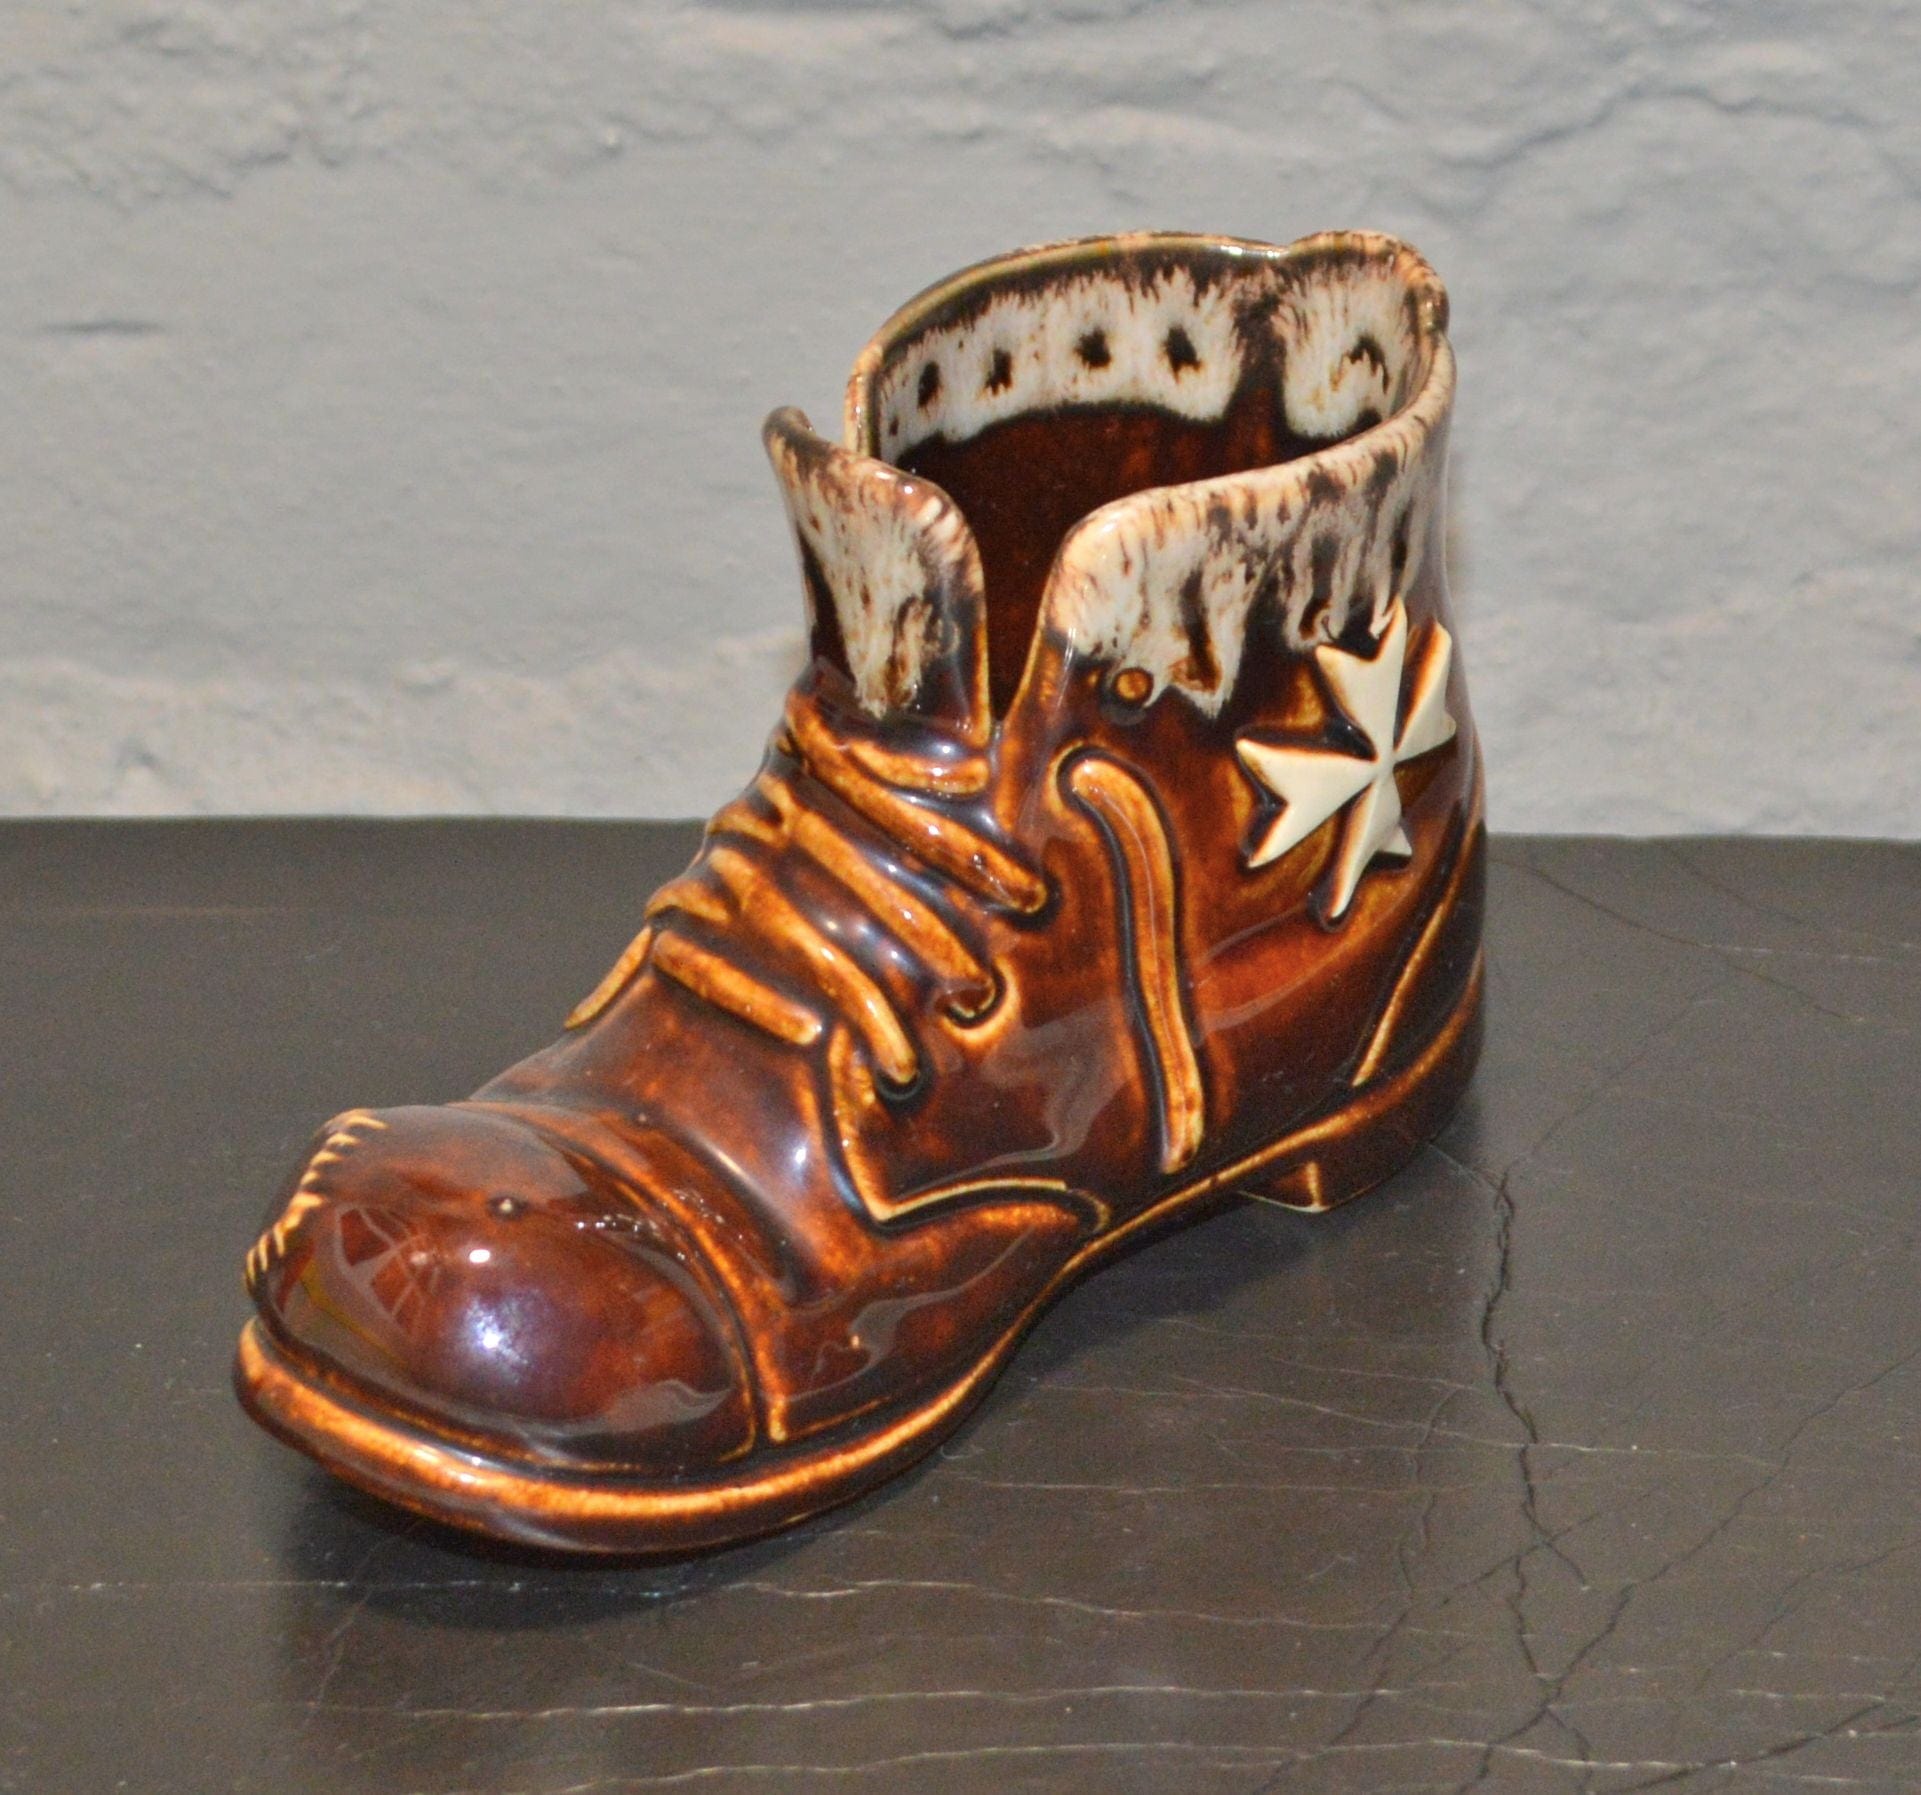 ORNAMENTAL BROWN BOOT(PREVIOUSLY OWNED) GOOD CONDITION - TMD167207